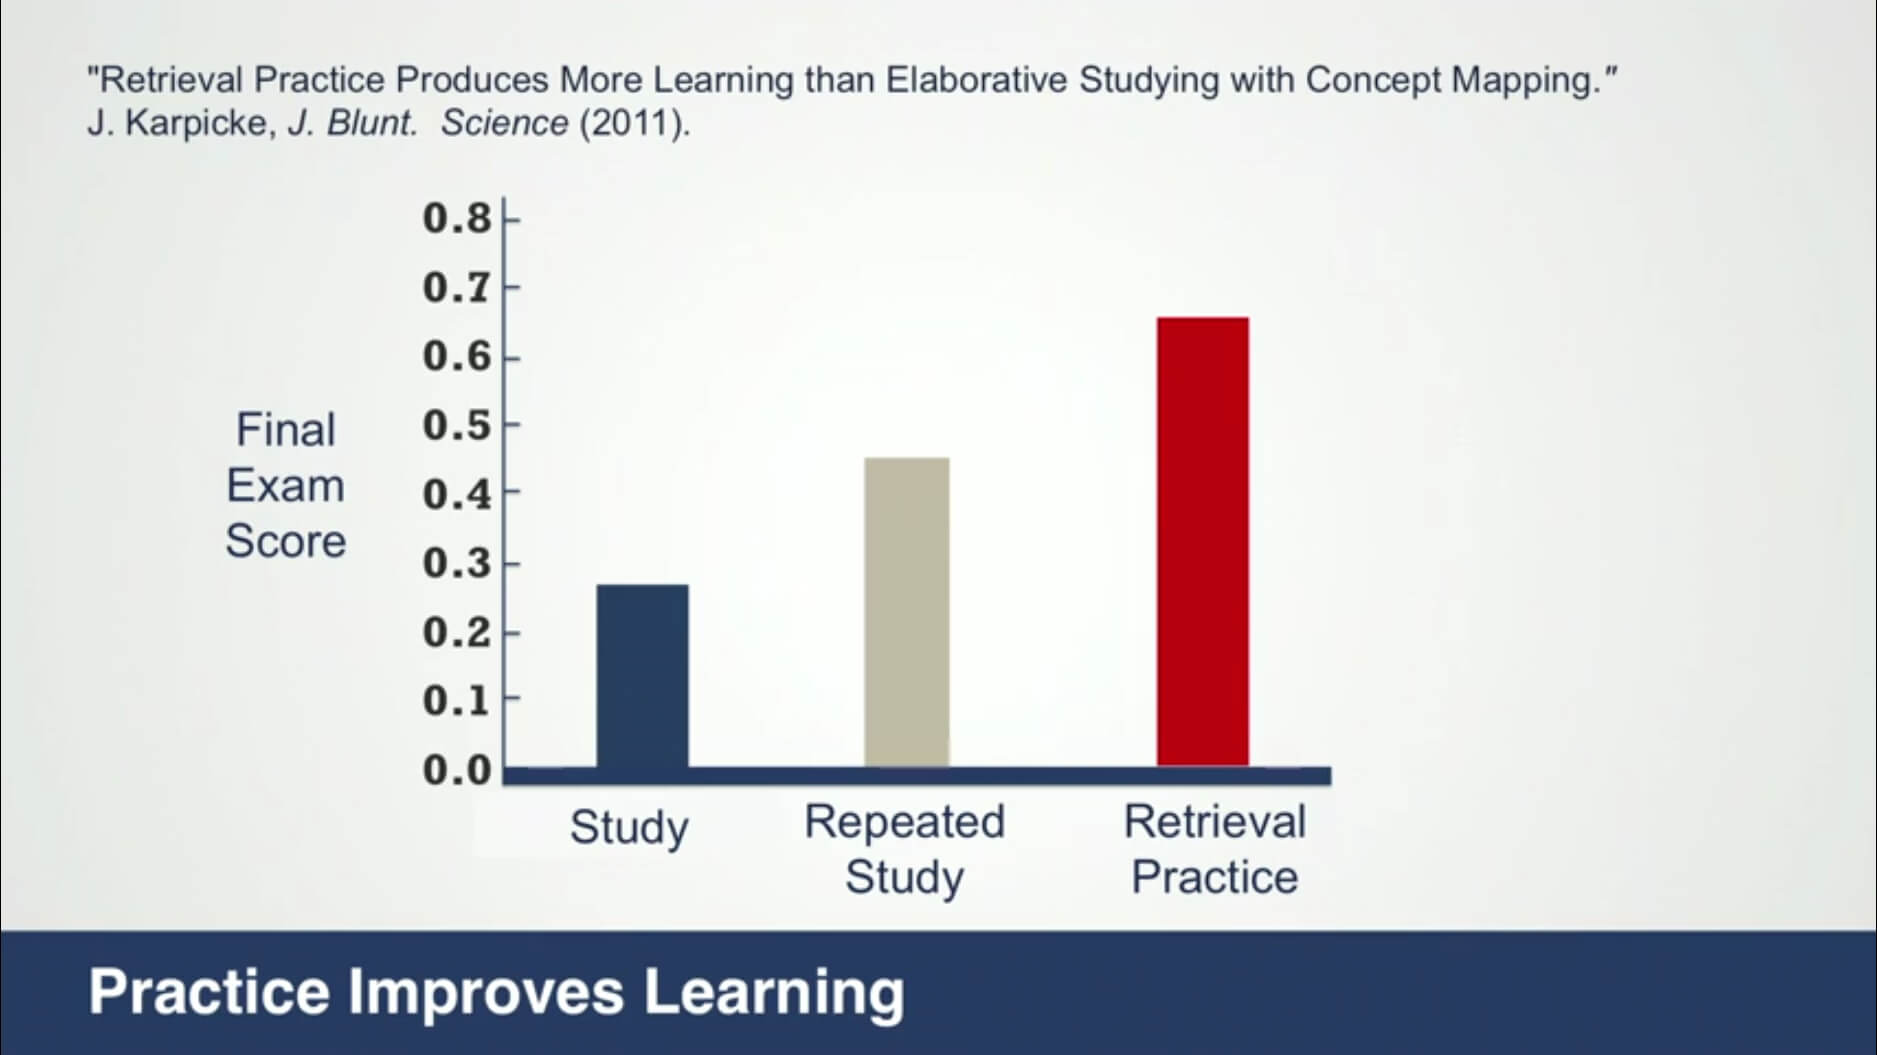 "Retrieval Practice Produces More Learning than Elaborate Studying with Concept Mapping" by J. Karpicke and J. Blunt